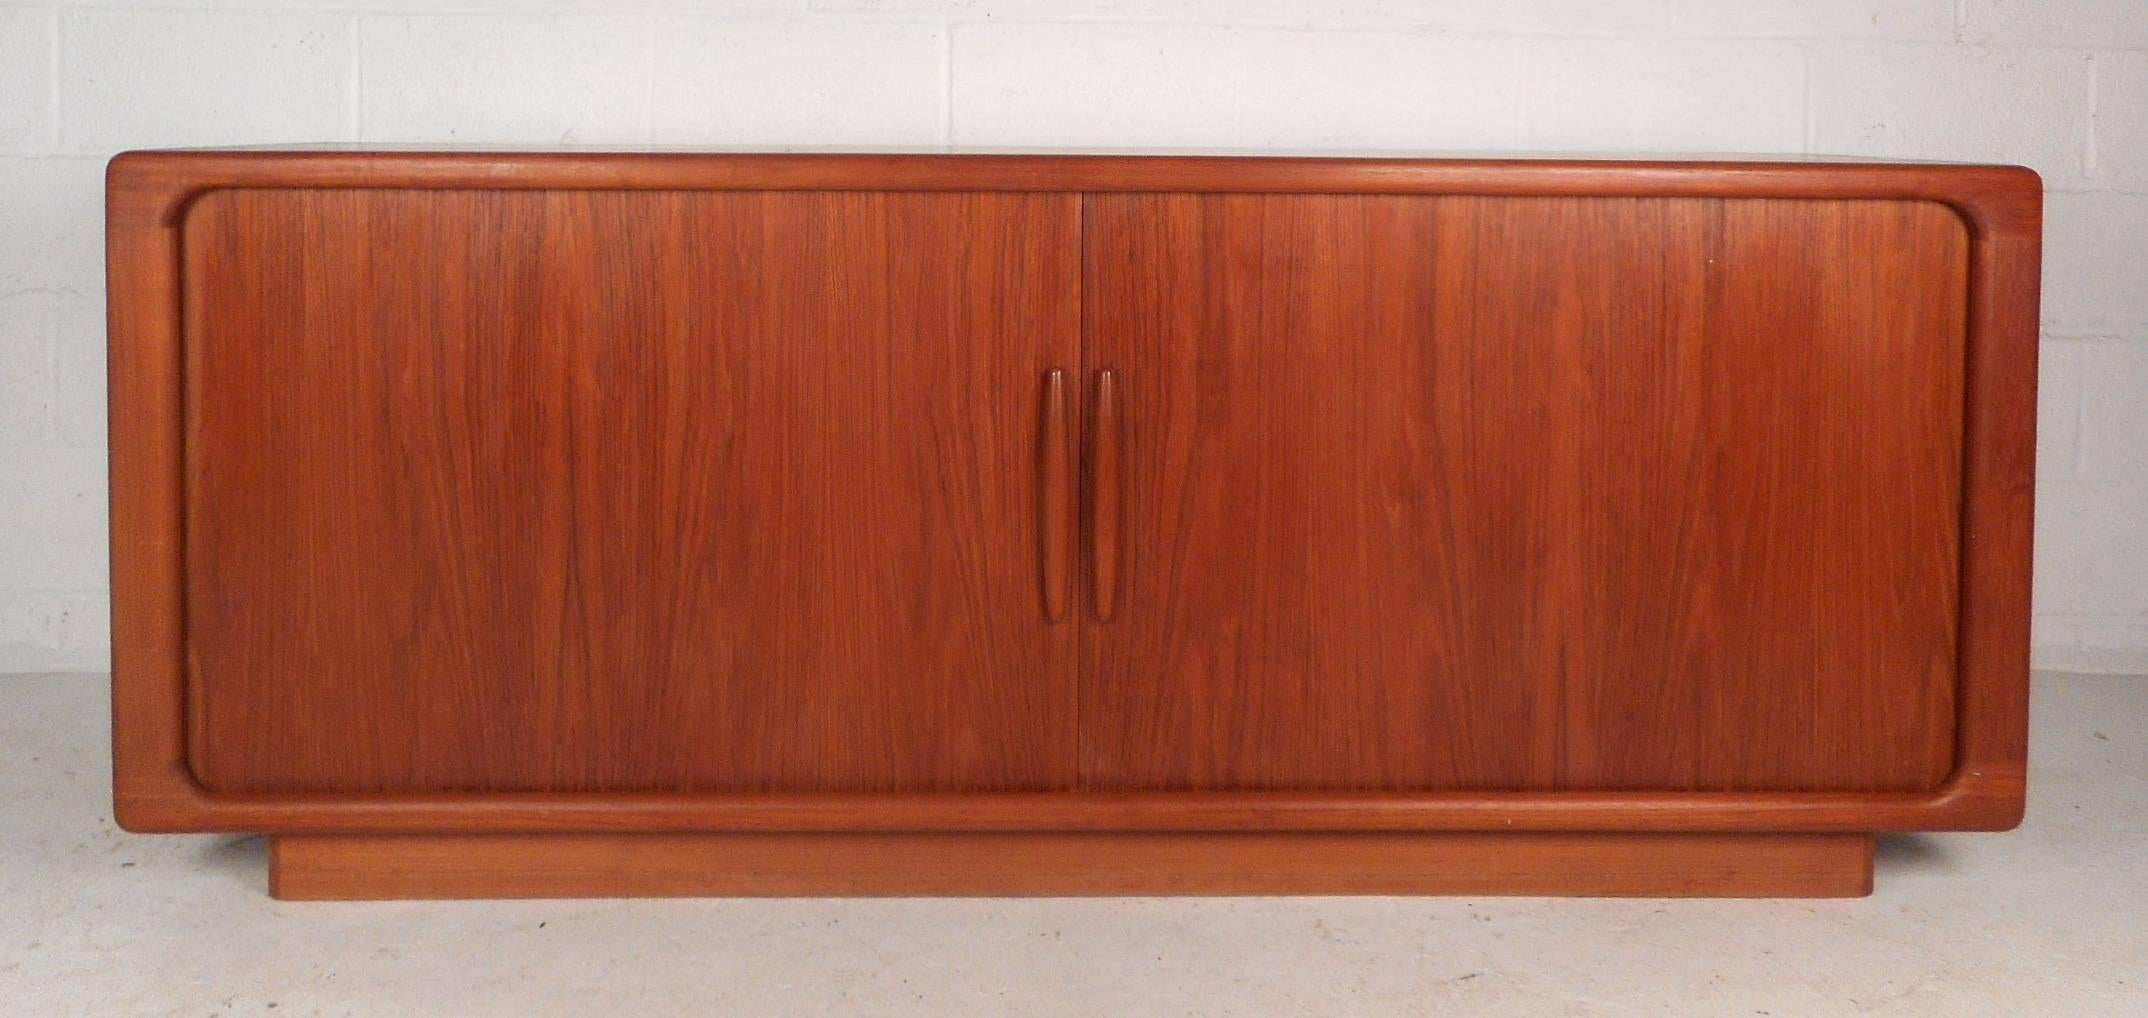 Elegant Mid-Century Modern sideboard with two tambour doors that open smoothly and hide two shelving compartments and five small drawers. Stunning vintage teak wood grain, dove tail joints, and unique door pulls add to the allure. This impressive